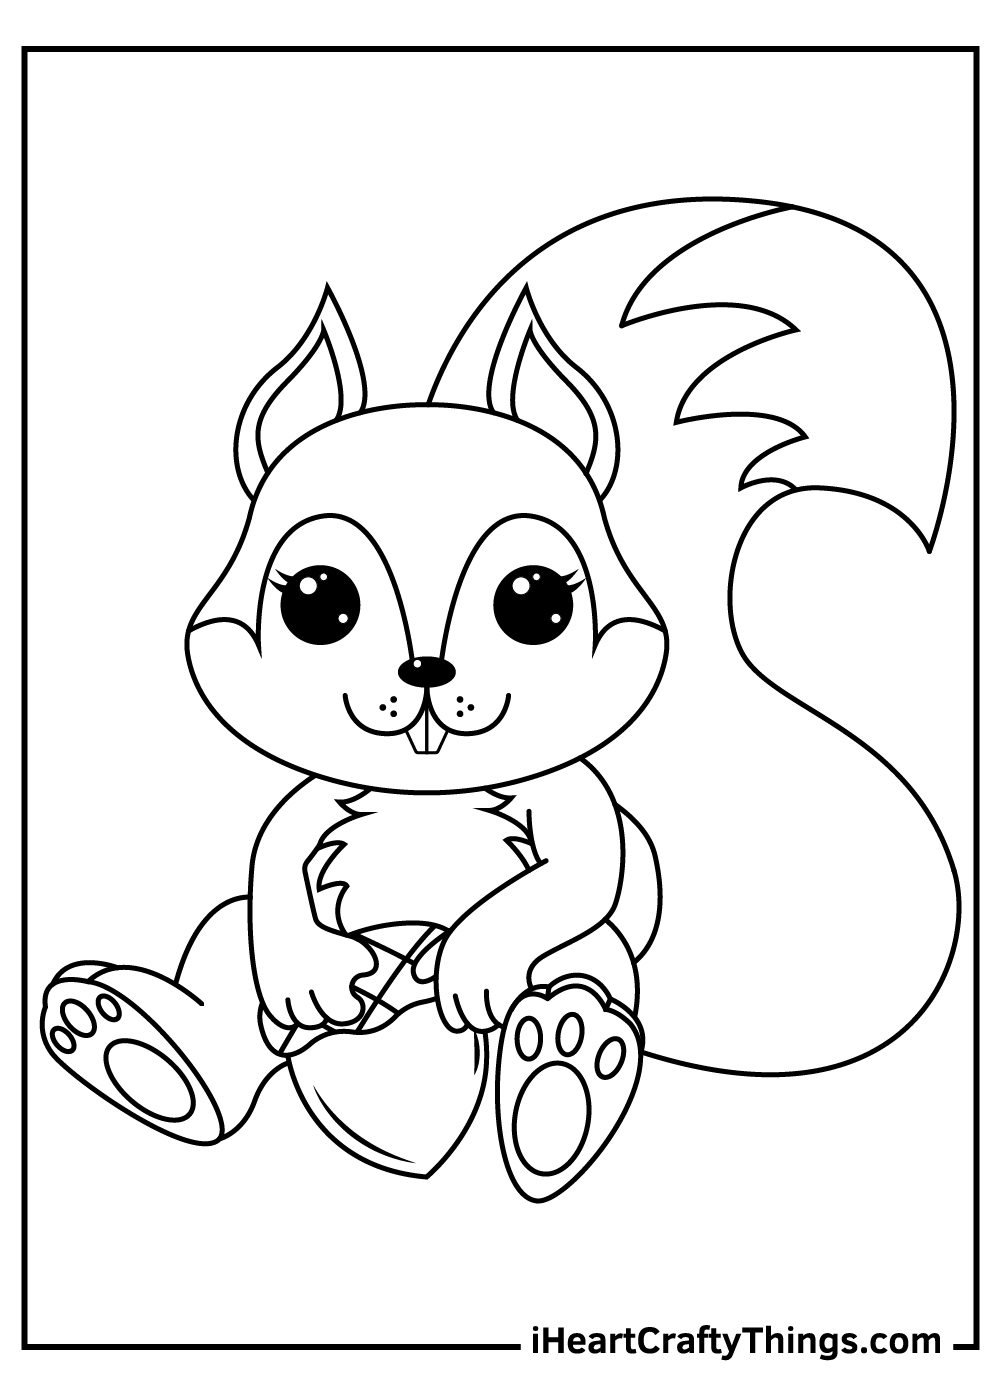 Printable Squirrels Coloring Pages Updated 2021